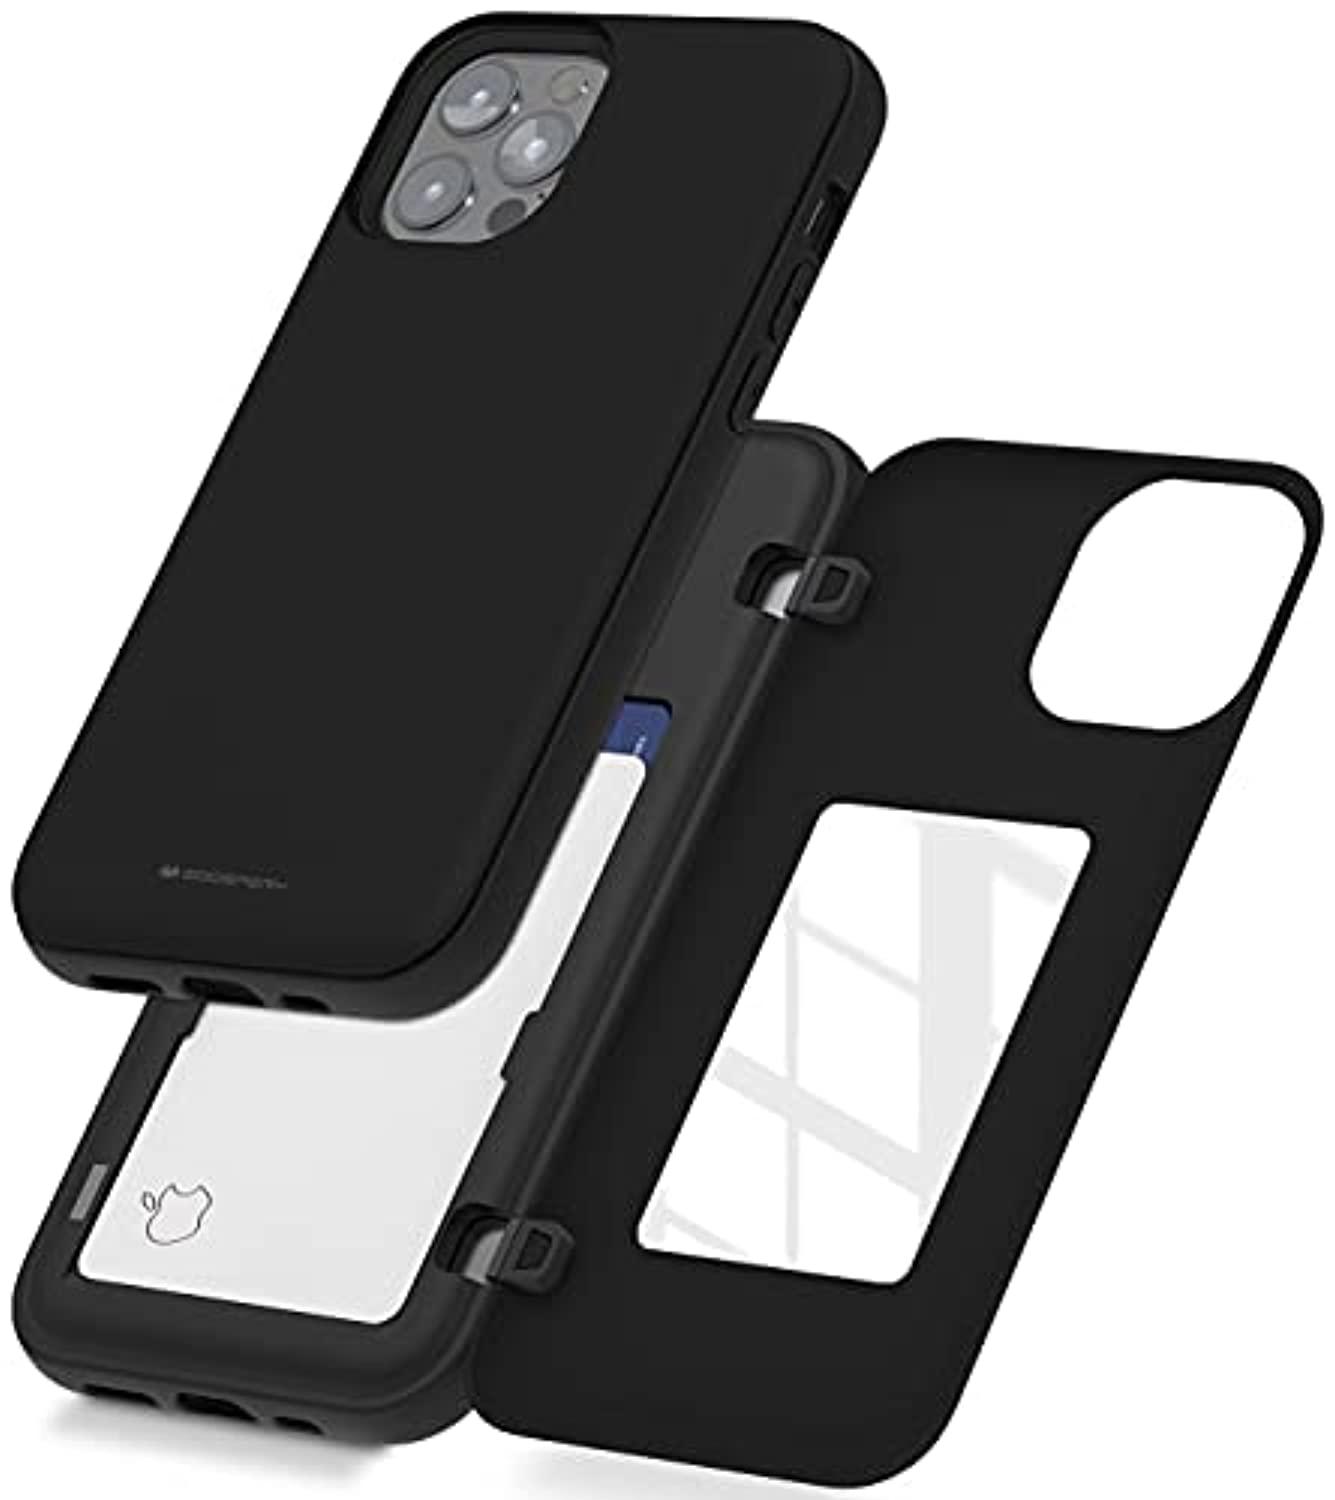 goospery for iphone 12/12 pro (2020) 6.1-inch card holder wallet case, protective dual layer bumper phone back cover with hid